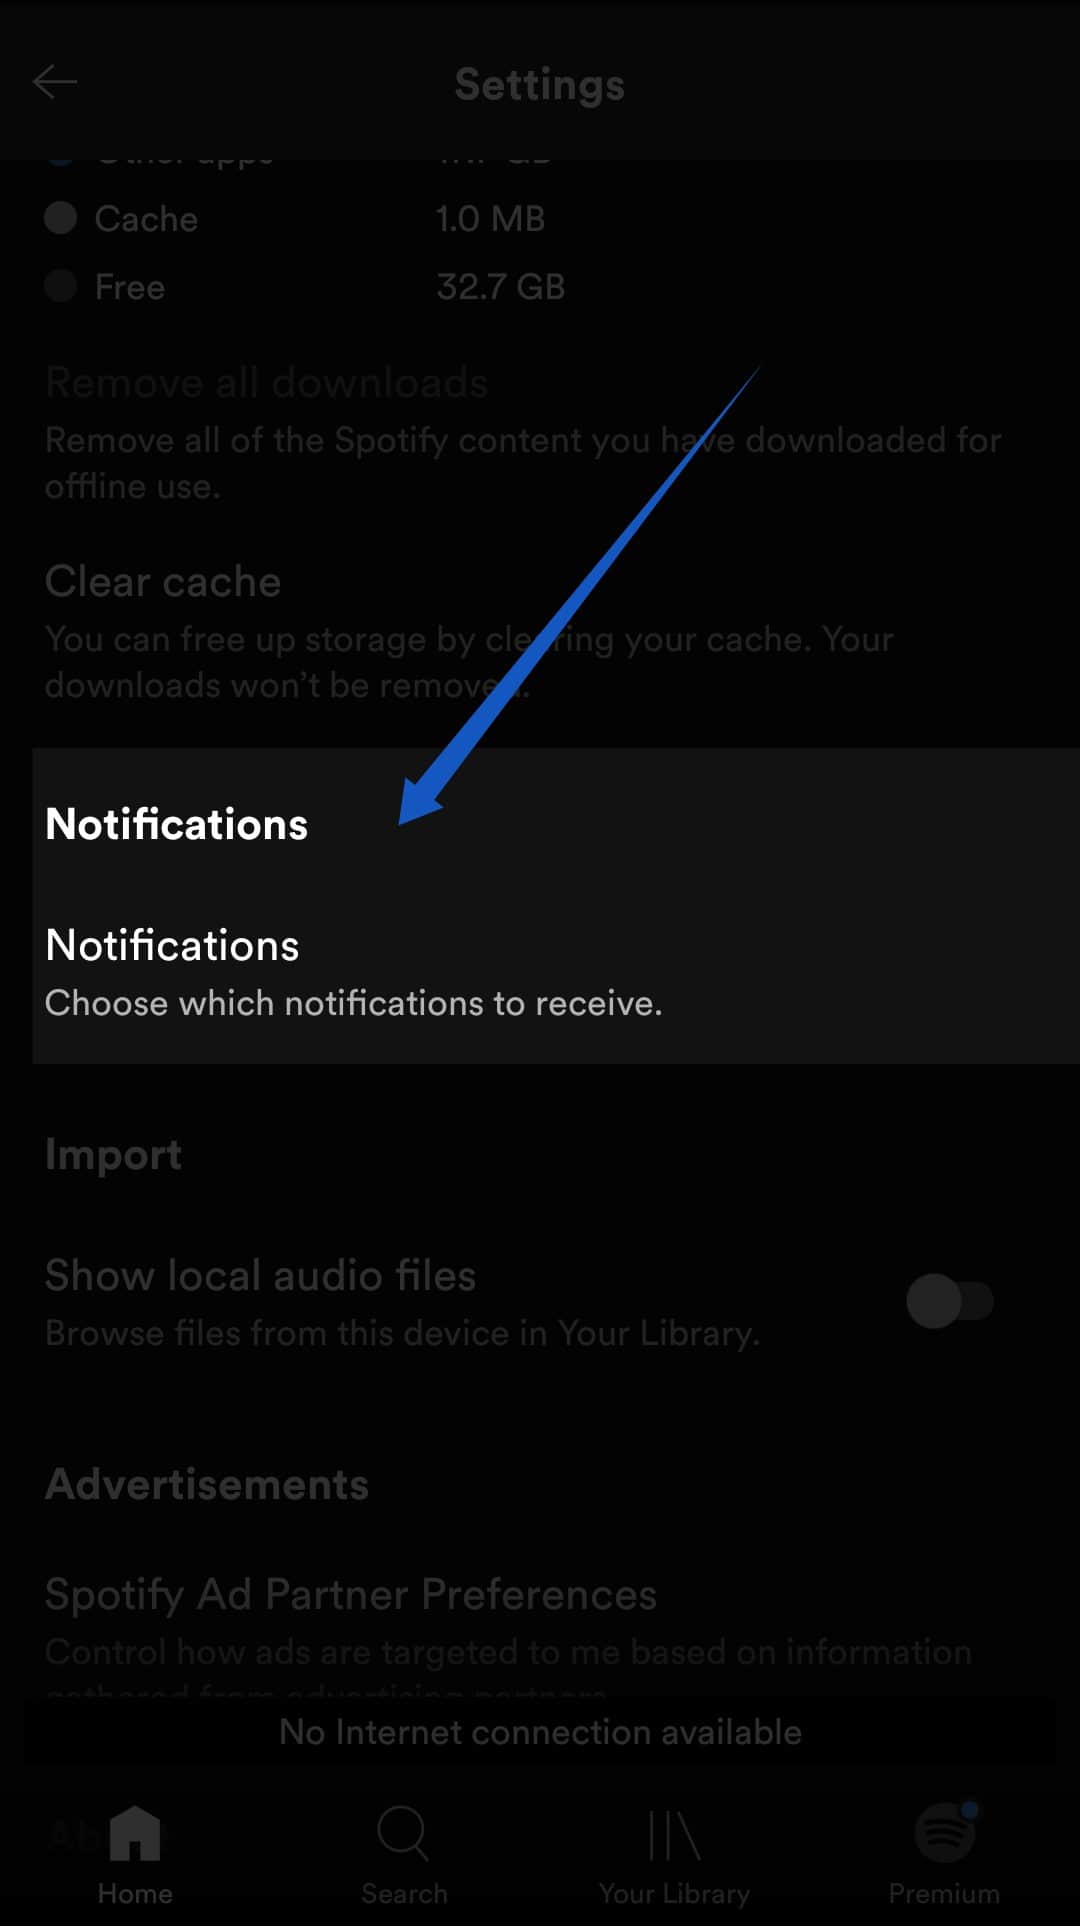 Select the ‘Push and Email Notifications’ option - Spotify Notify Users through Email